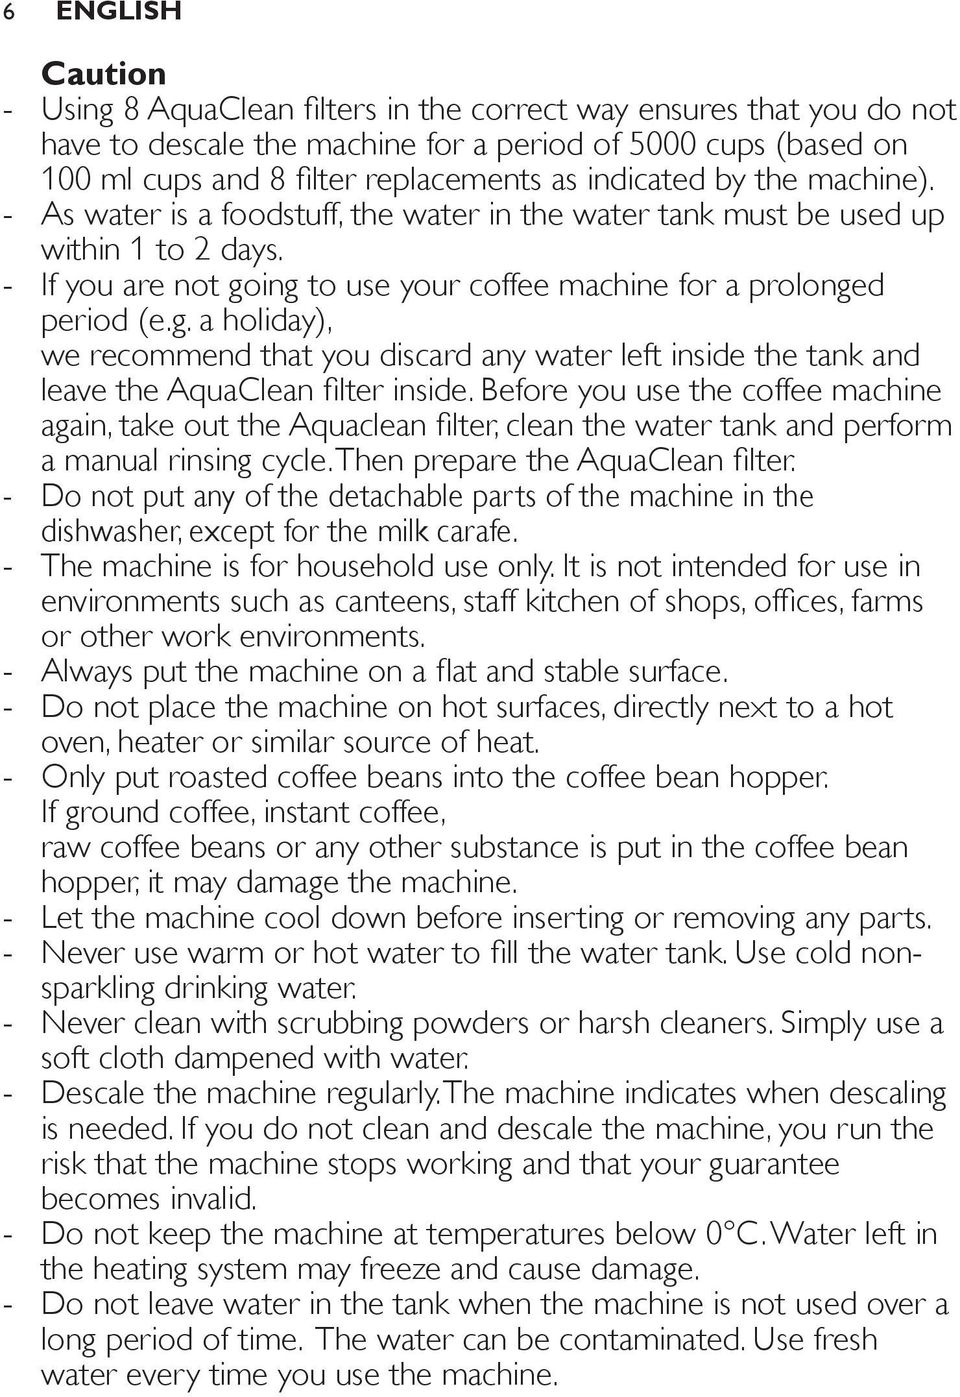 ing to use your coffee machine for a prolonged period (e.g. a holiday), we recommend that you discard any water left inside the tank and leave the AquaClean filter inside.